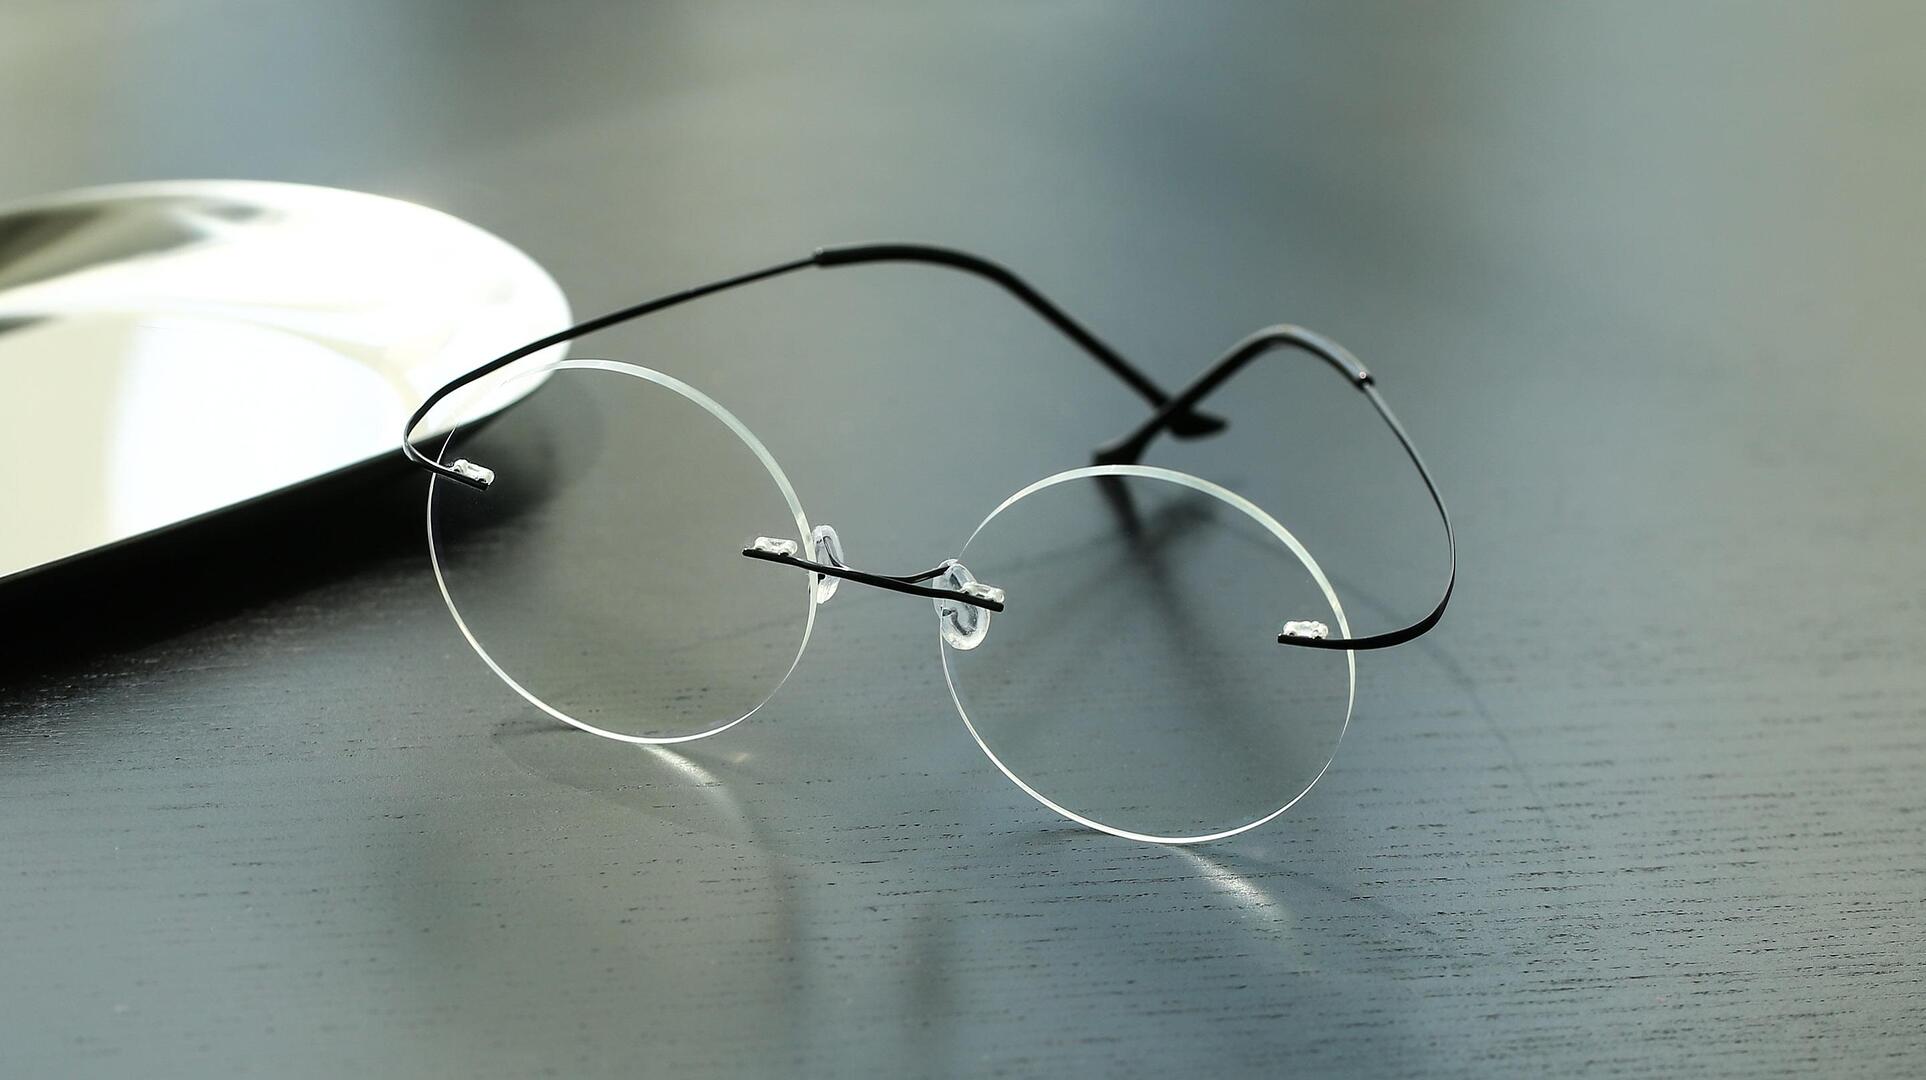 Stylish round rimless glasses are lightweight and fashionable on men and women.